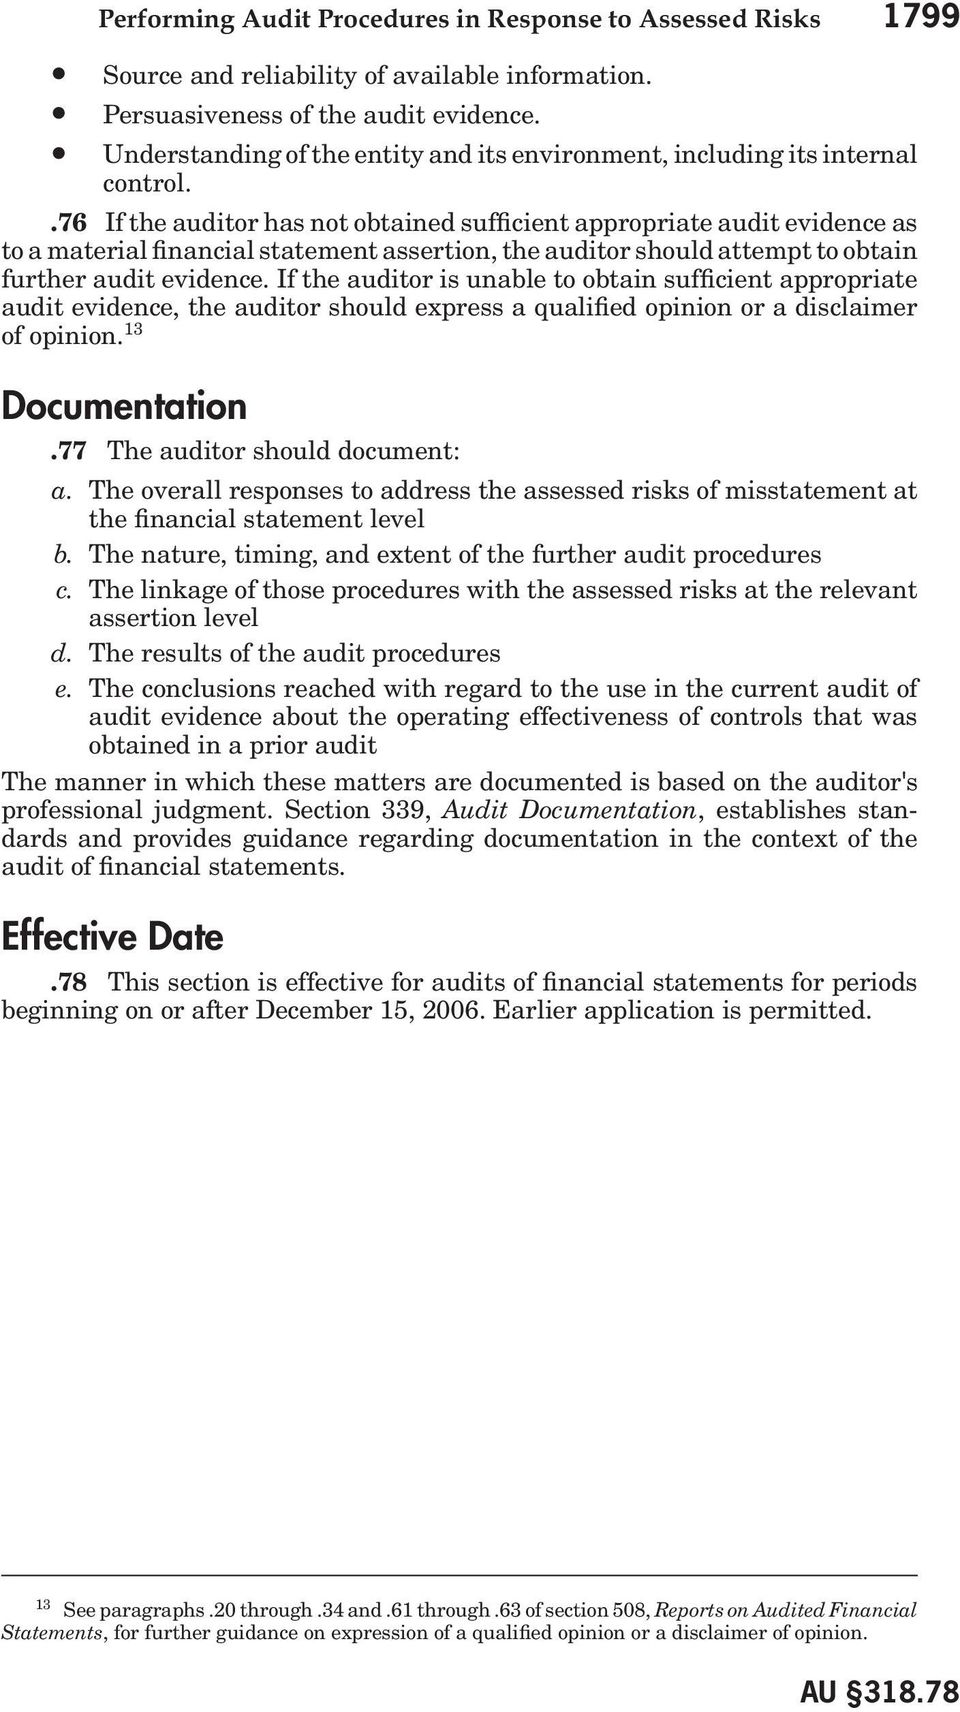 .76 If the auditor has not obtained sufficient appropriate audit evidence as to a material financial statement assertion, the auditor should attempt to obtain further audit evidence.